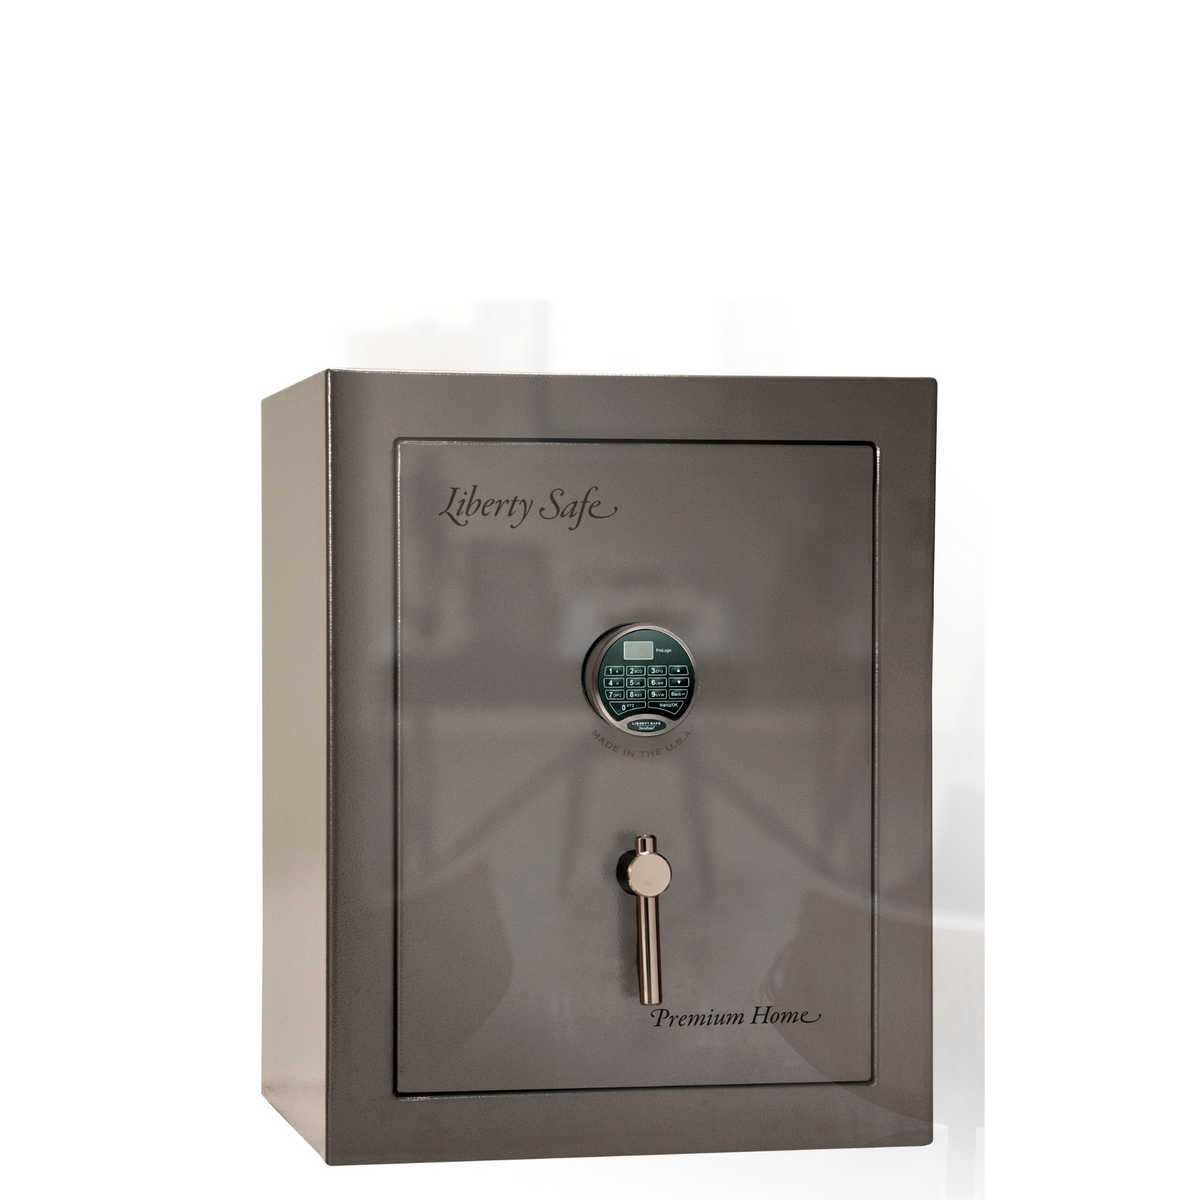 Premium Home Series | Level 7 Security | 2 Hour Fire Protection | 08 | Dimensions: 29.75&quot;(H) x 24.5&quot;(W) x 19&quot;(D) | Champagne Gloss - Closed Door